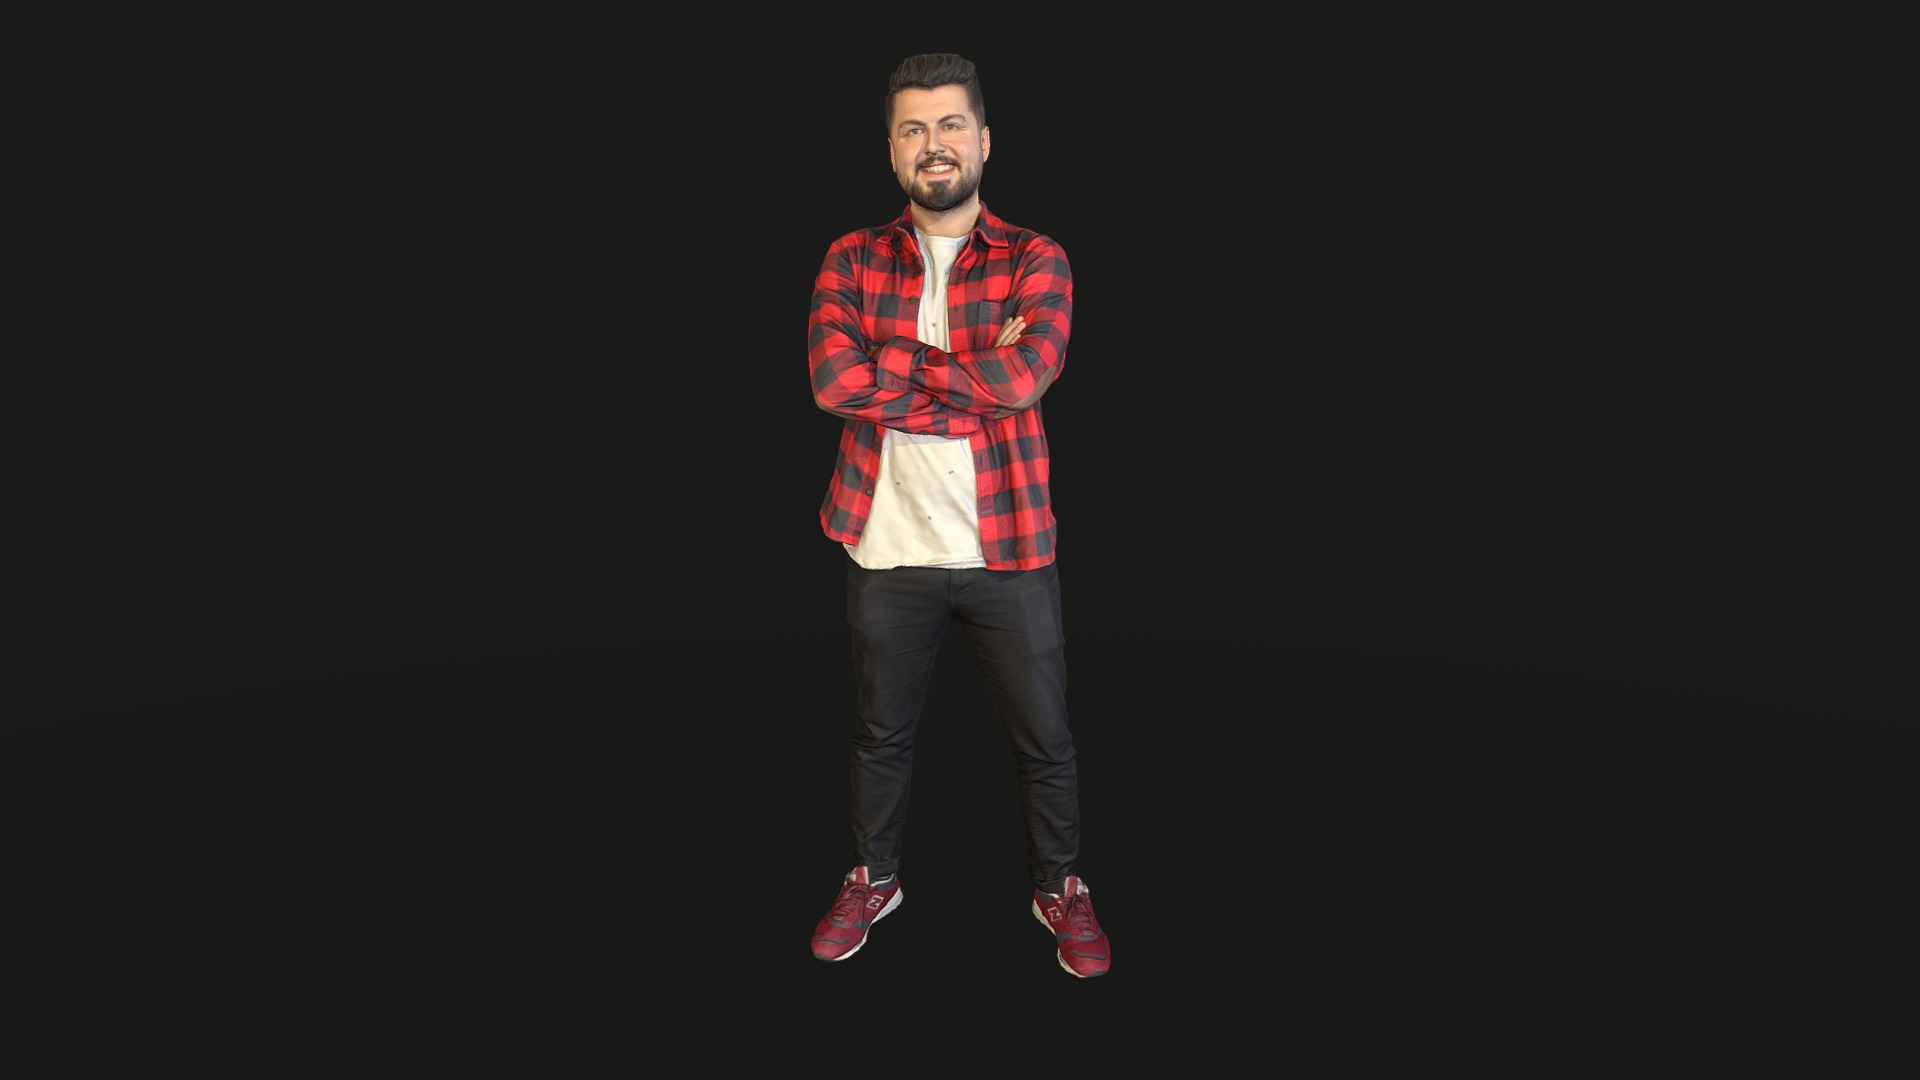 3D model Person 15 - This is a 3D model of the Person 15. The 3D model is about a man wearing a red and white plaid shirt and red shoes.